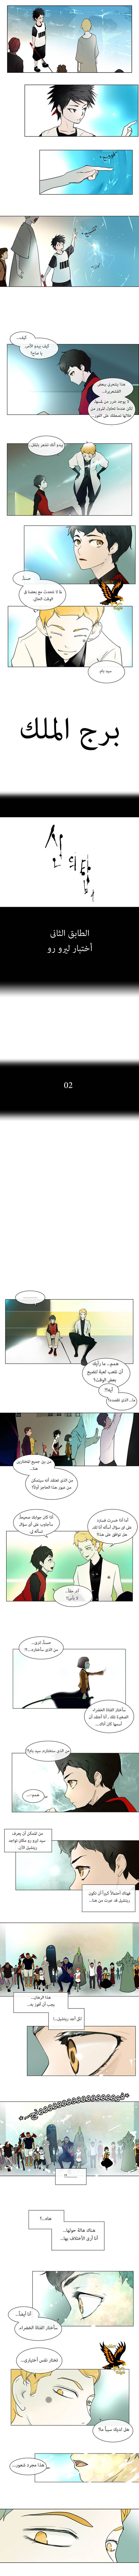 Tower of God: Chapter 10 - Page 1